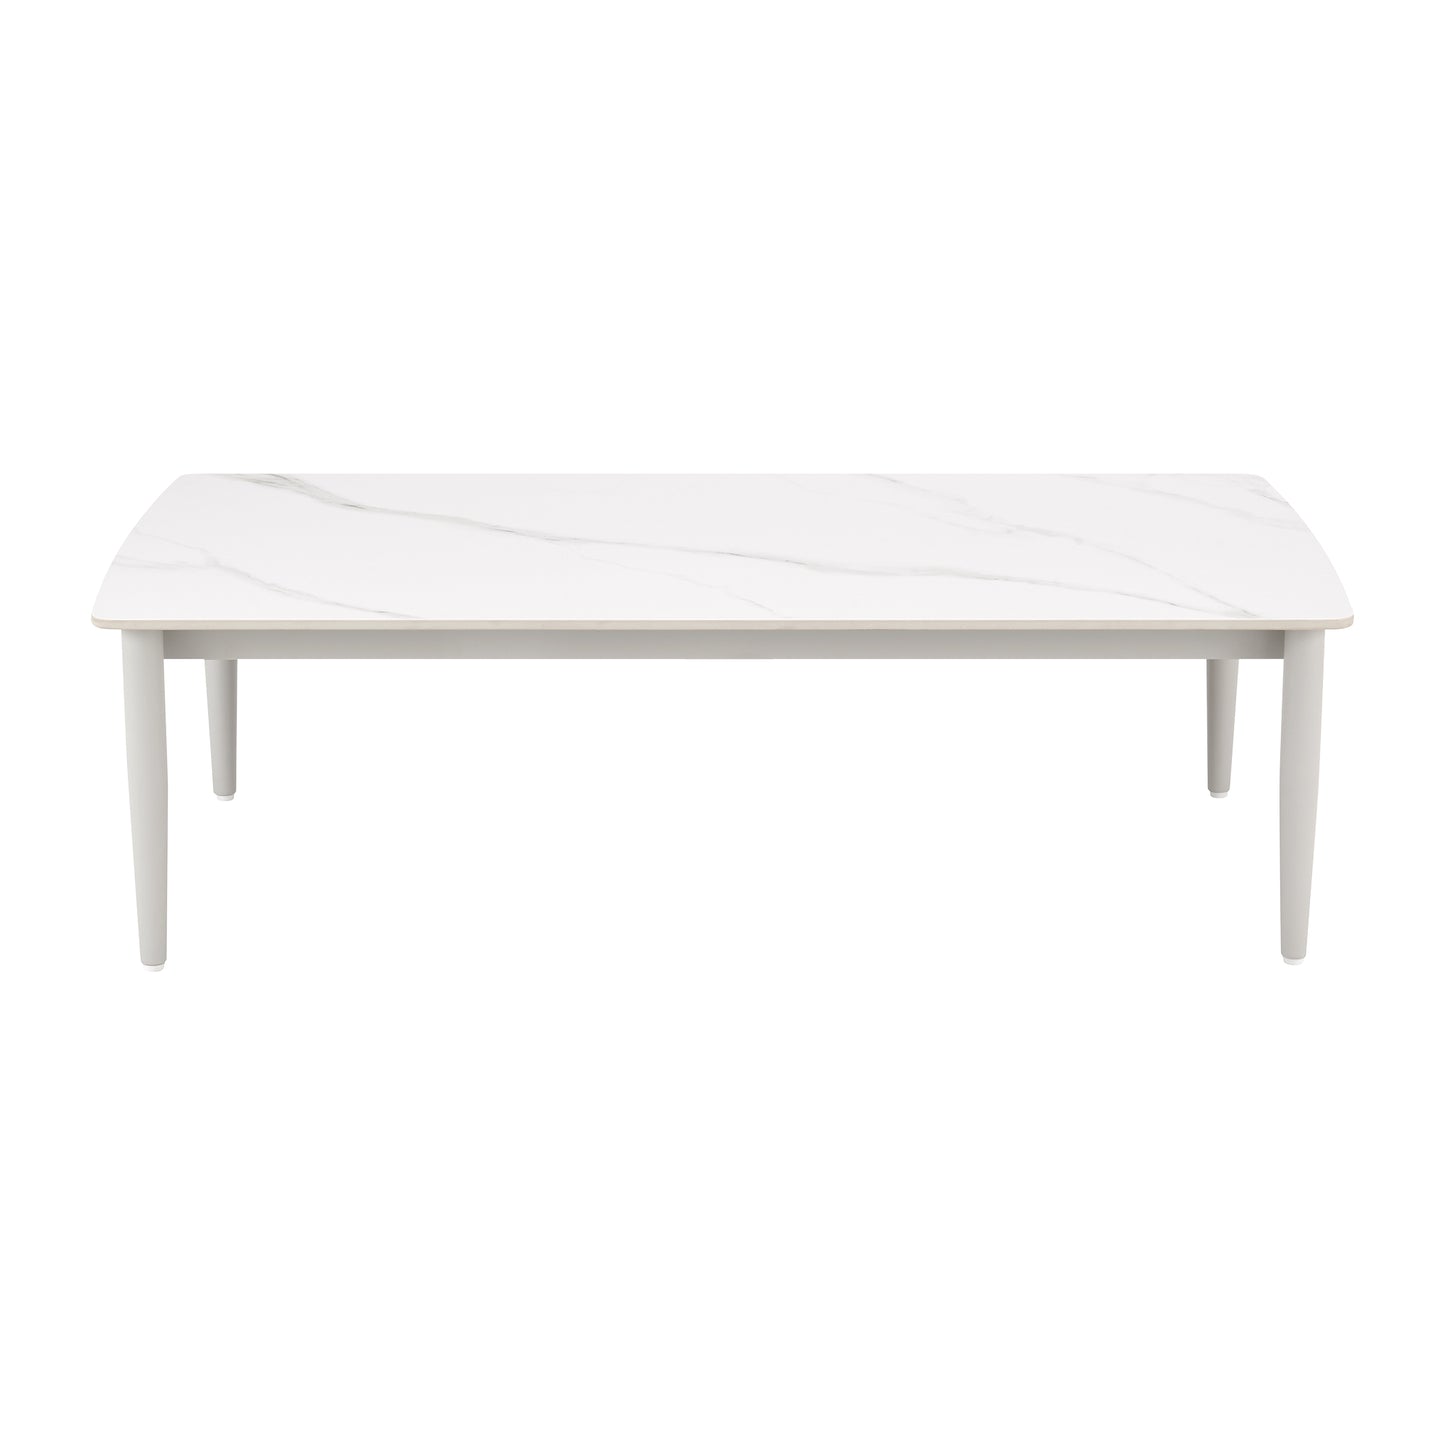 Rhodes Outdoor Patio Rectangular Coffee Table in Snowy Sintered Stone and Porcelain Finish